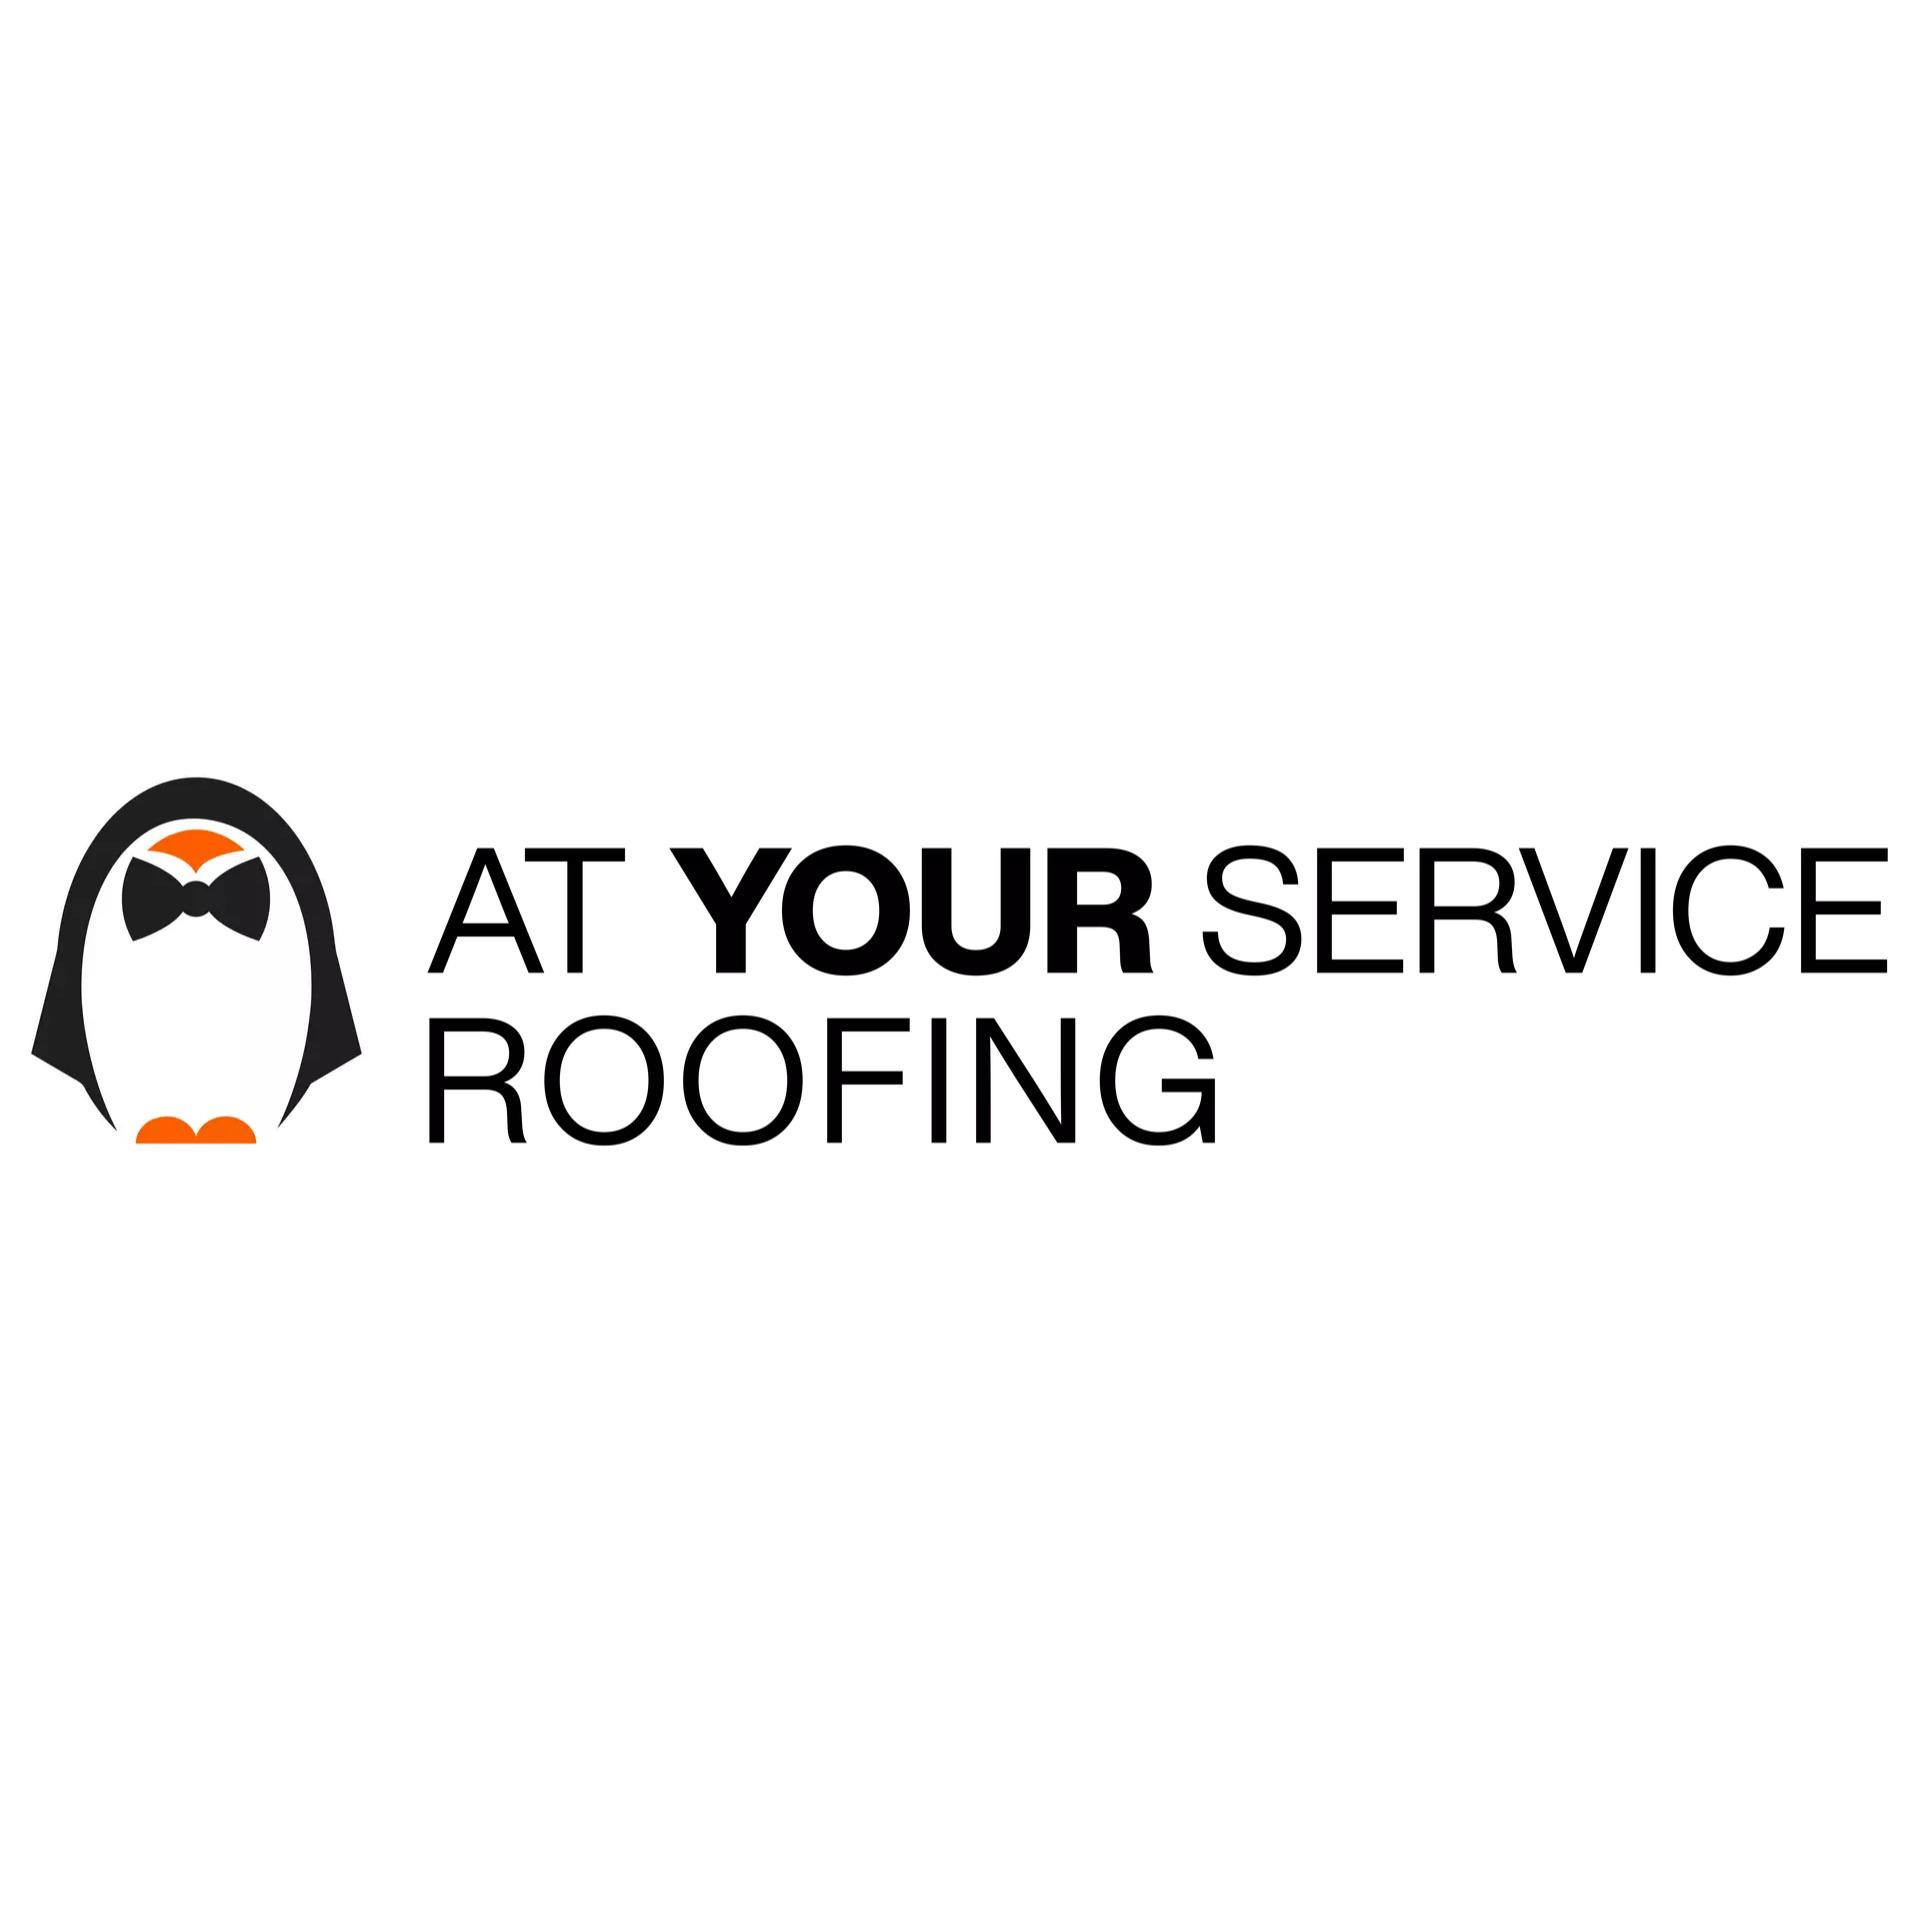 At Your Service Roofing - Milford, OH 45150 - (513)549-5551 | ShowMeLocal.com